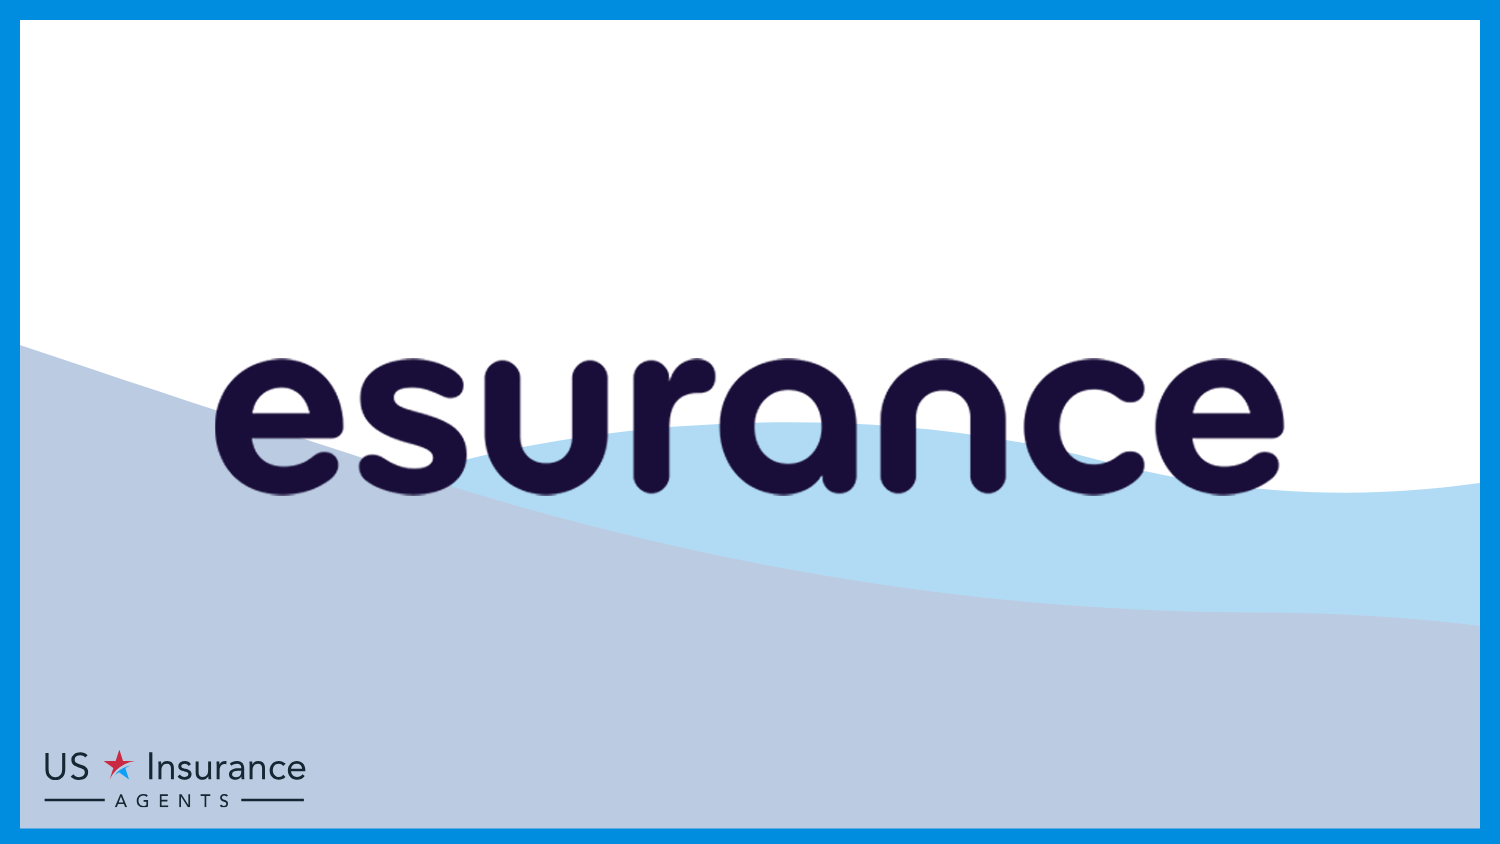 Esurance: Best Life Insurance for Unmarried Couples